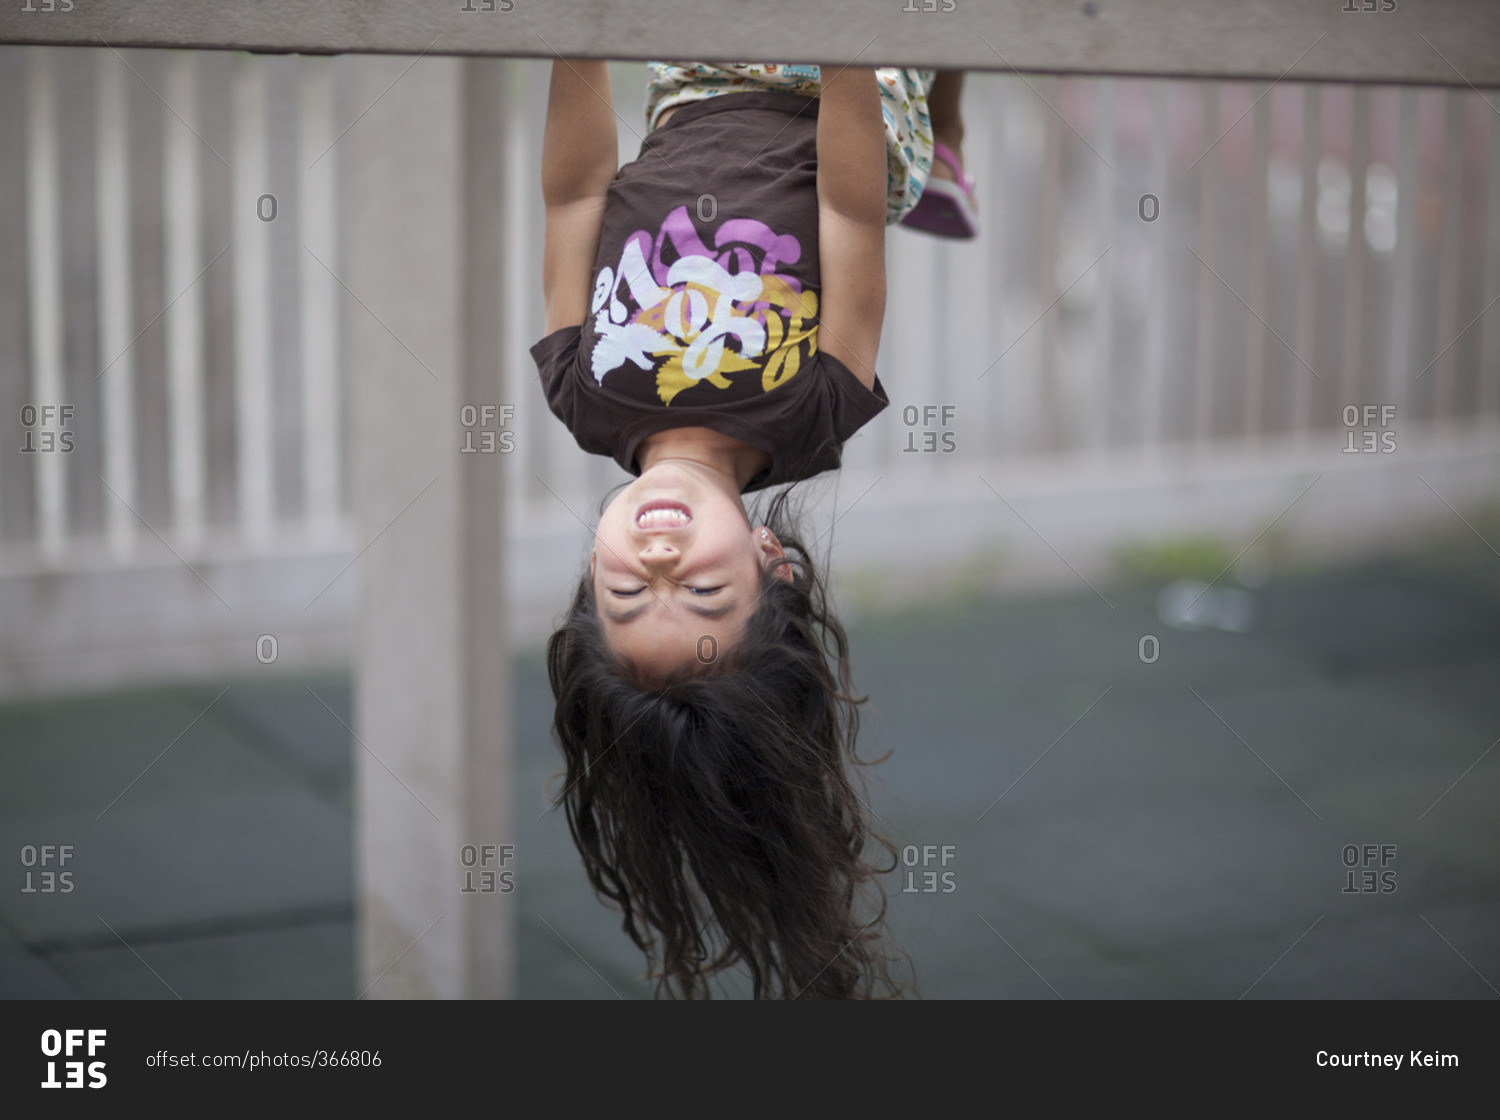 Portrait of young girl hanging upside down on monkey bars